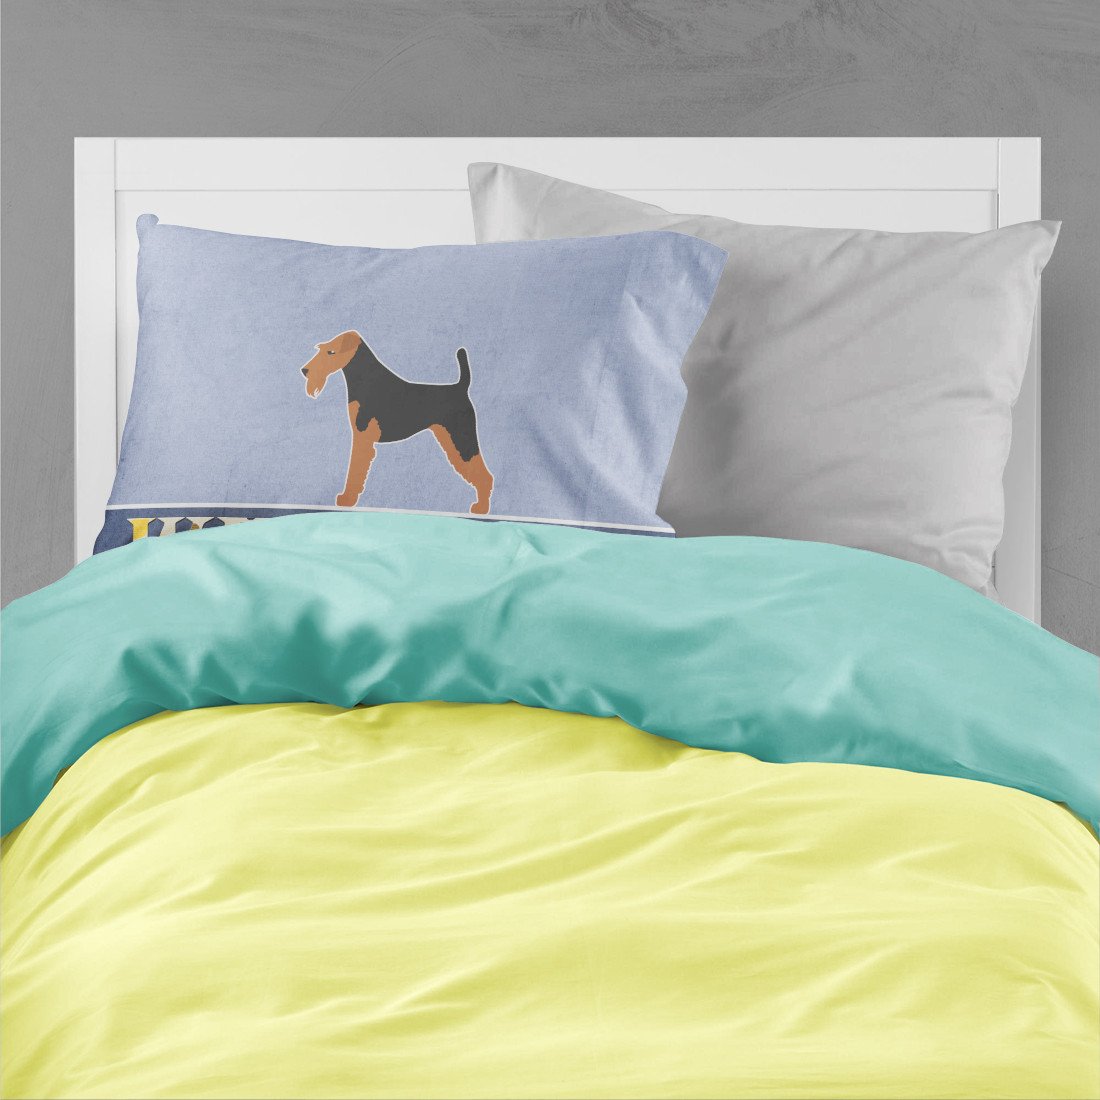 Airedale Terrier Welcome Fabric Standard Pillowcase BB5561PILLOWCASE by Caroline's Treasures